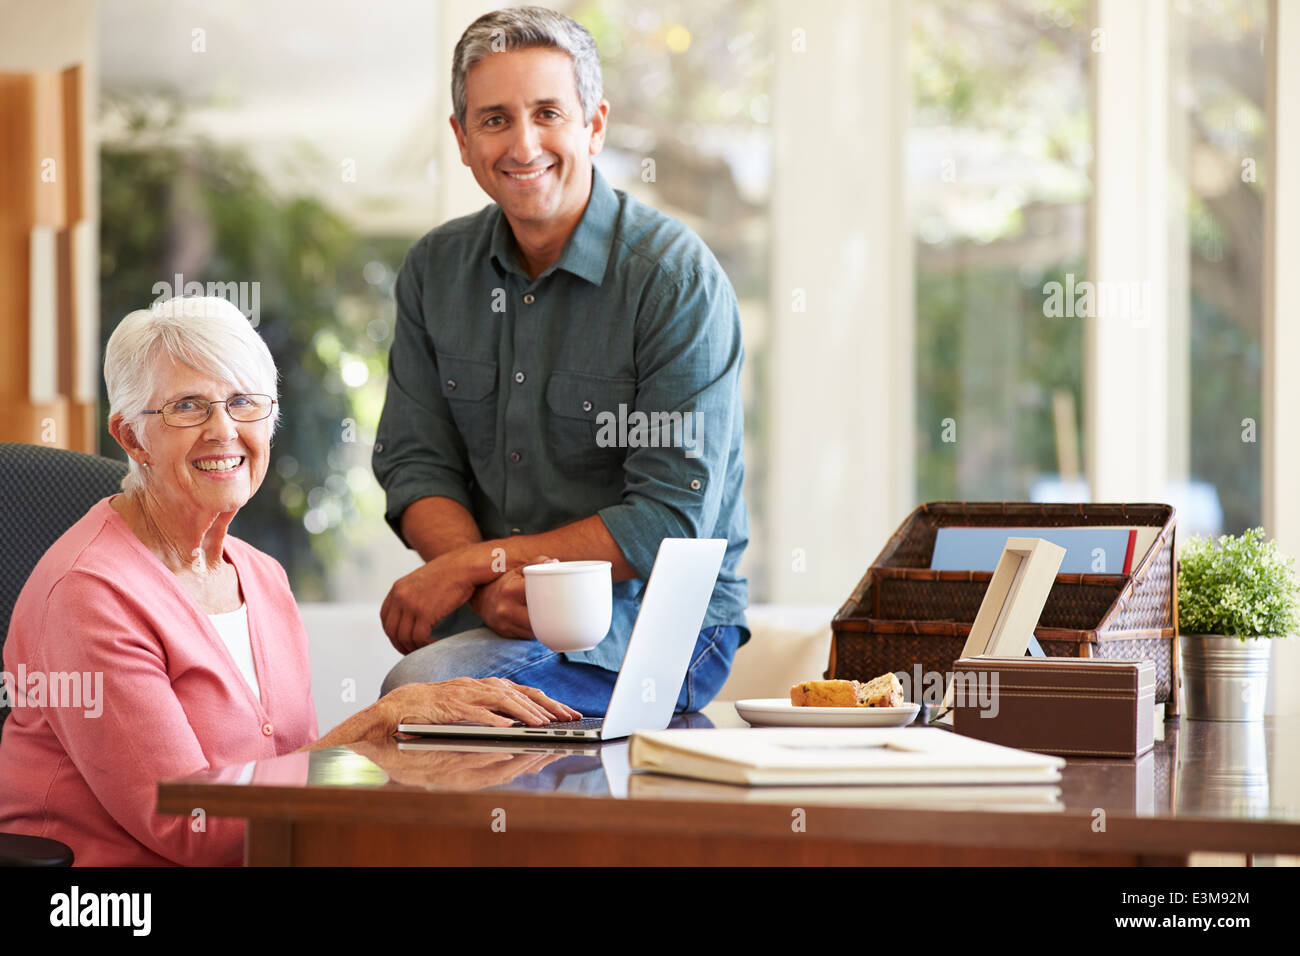 Adult Son Helping Mother With Laptop Stock Photo